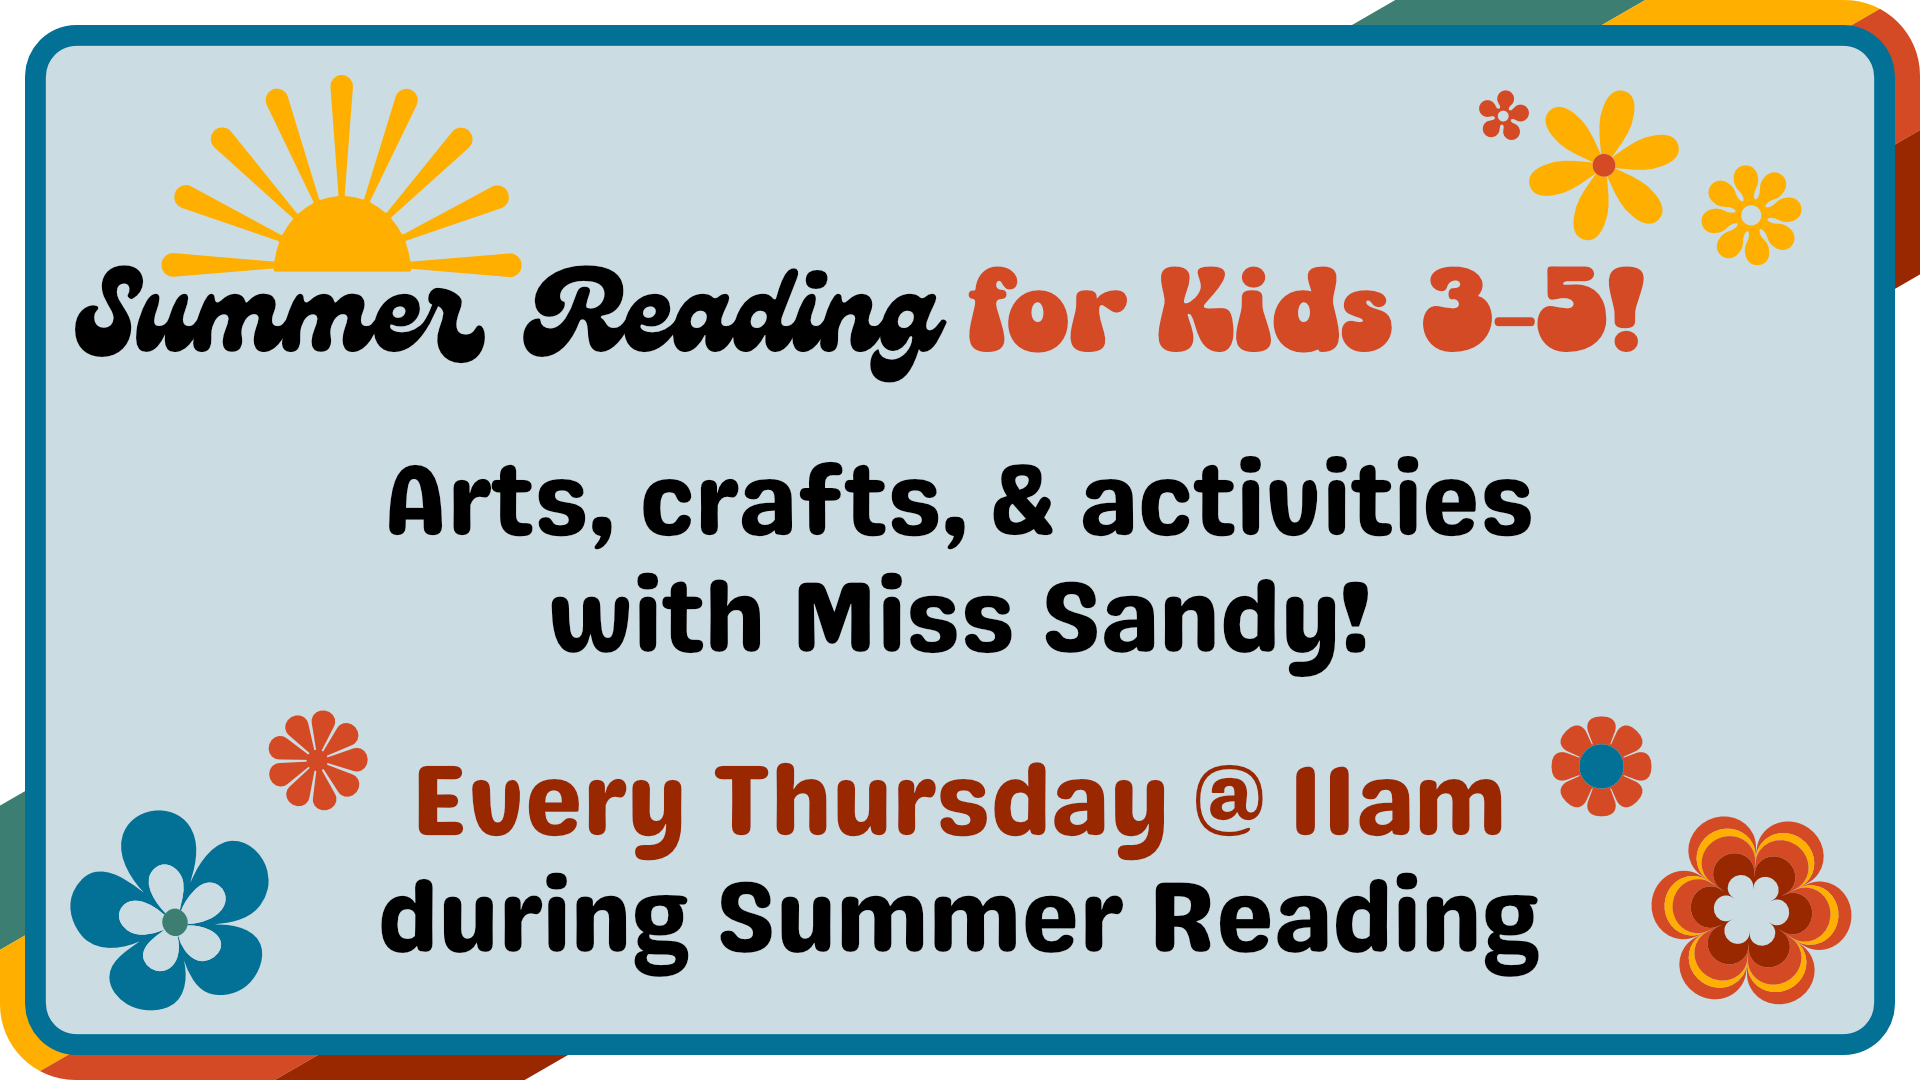 Summer Reading for kids 3-5, every Thursday at 11am